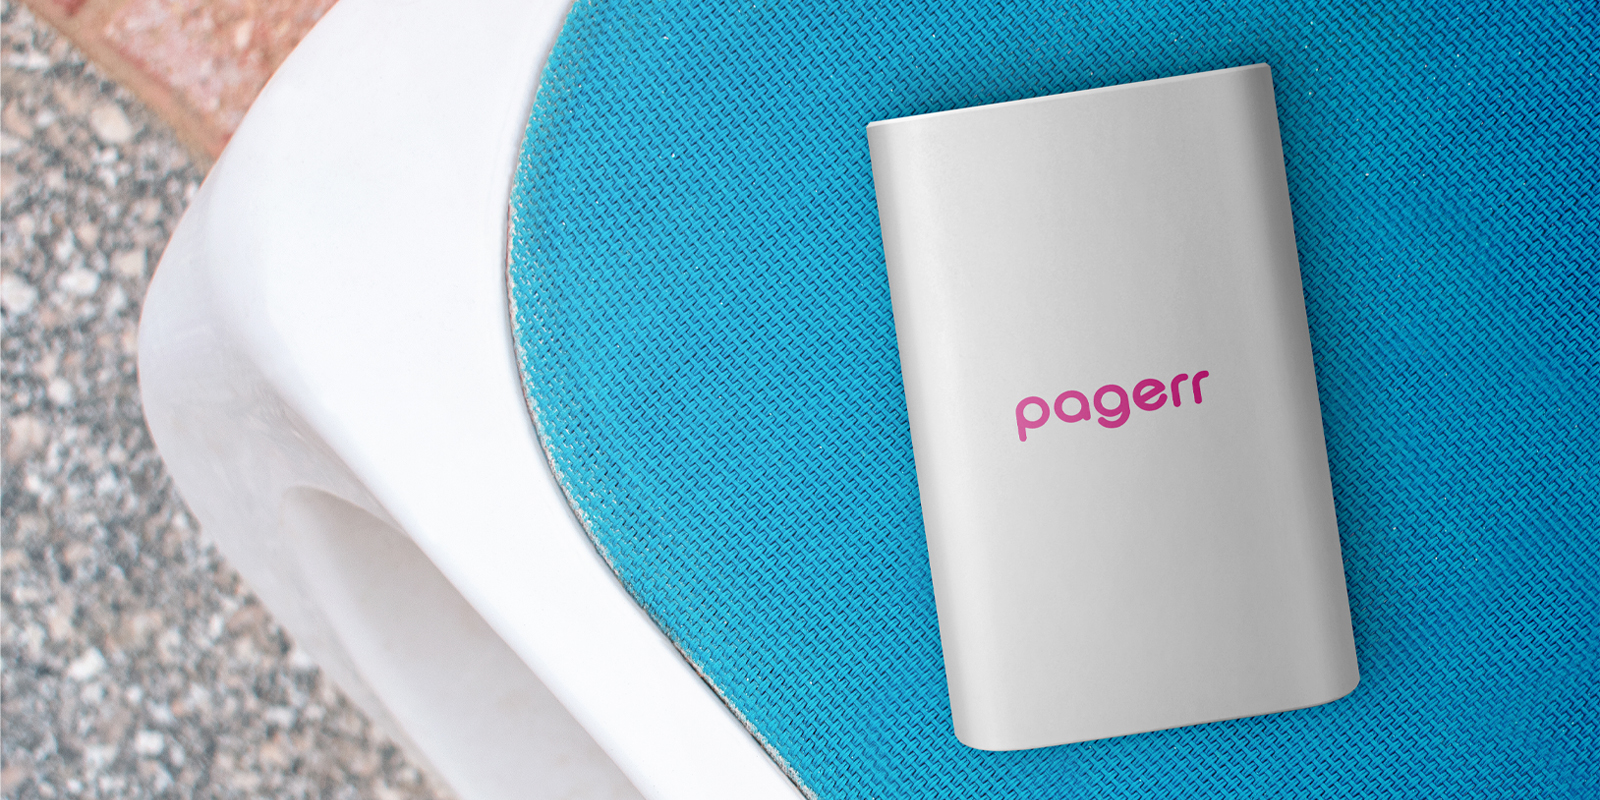 Chargers & power banks in Melbourne - Print with Pagerr